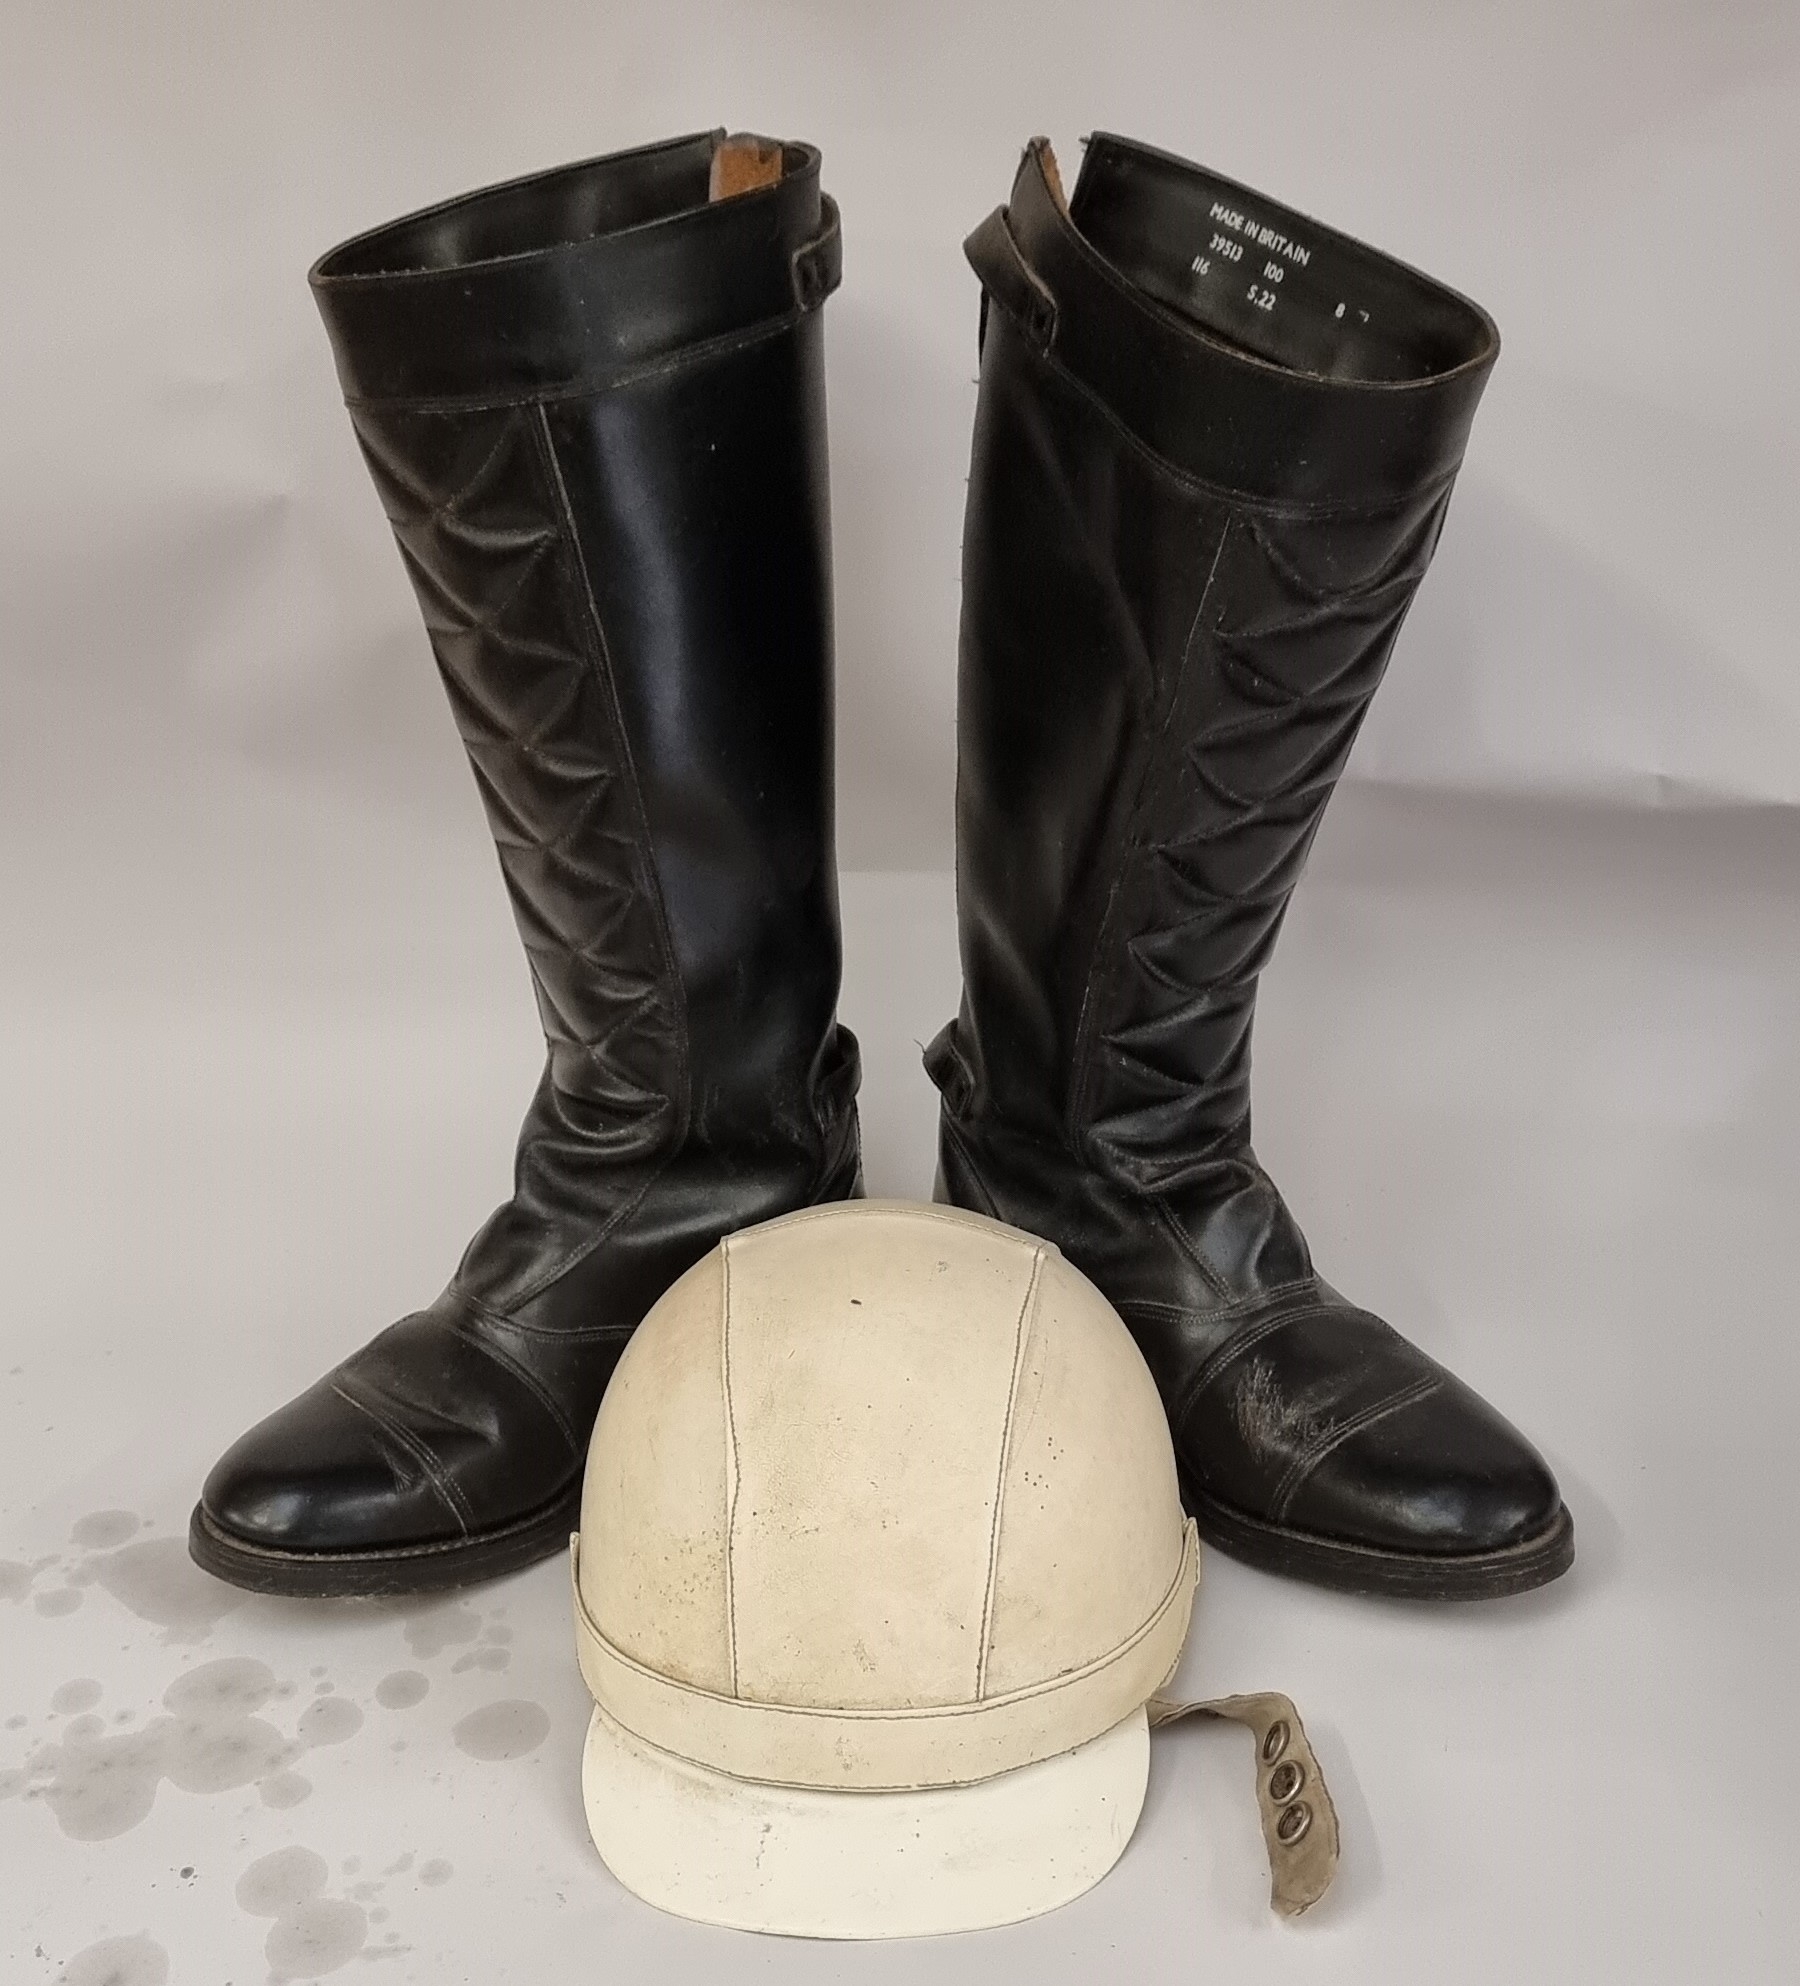 A Cromwell "The Noll" helmet, size 7 1/8, and a pair of Made in Britain leather riding boots, size 8